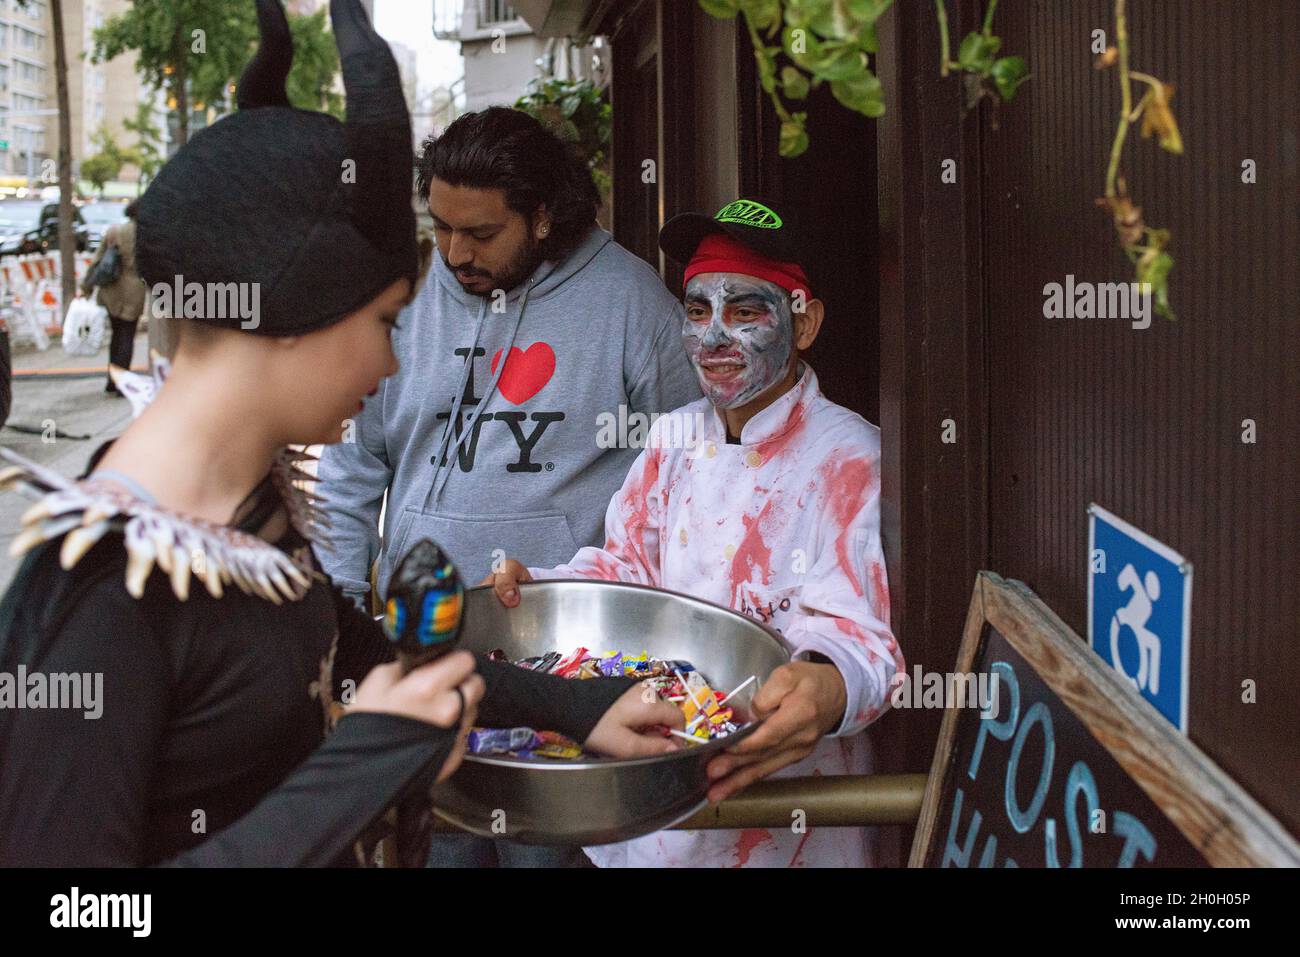 A neighborhood business giving out candy on Halloween in New York City. Stock Photo